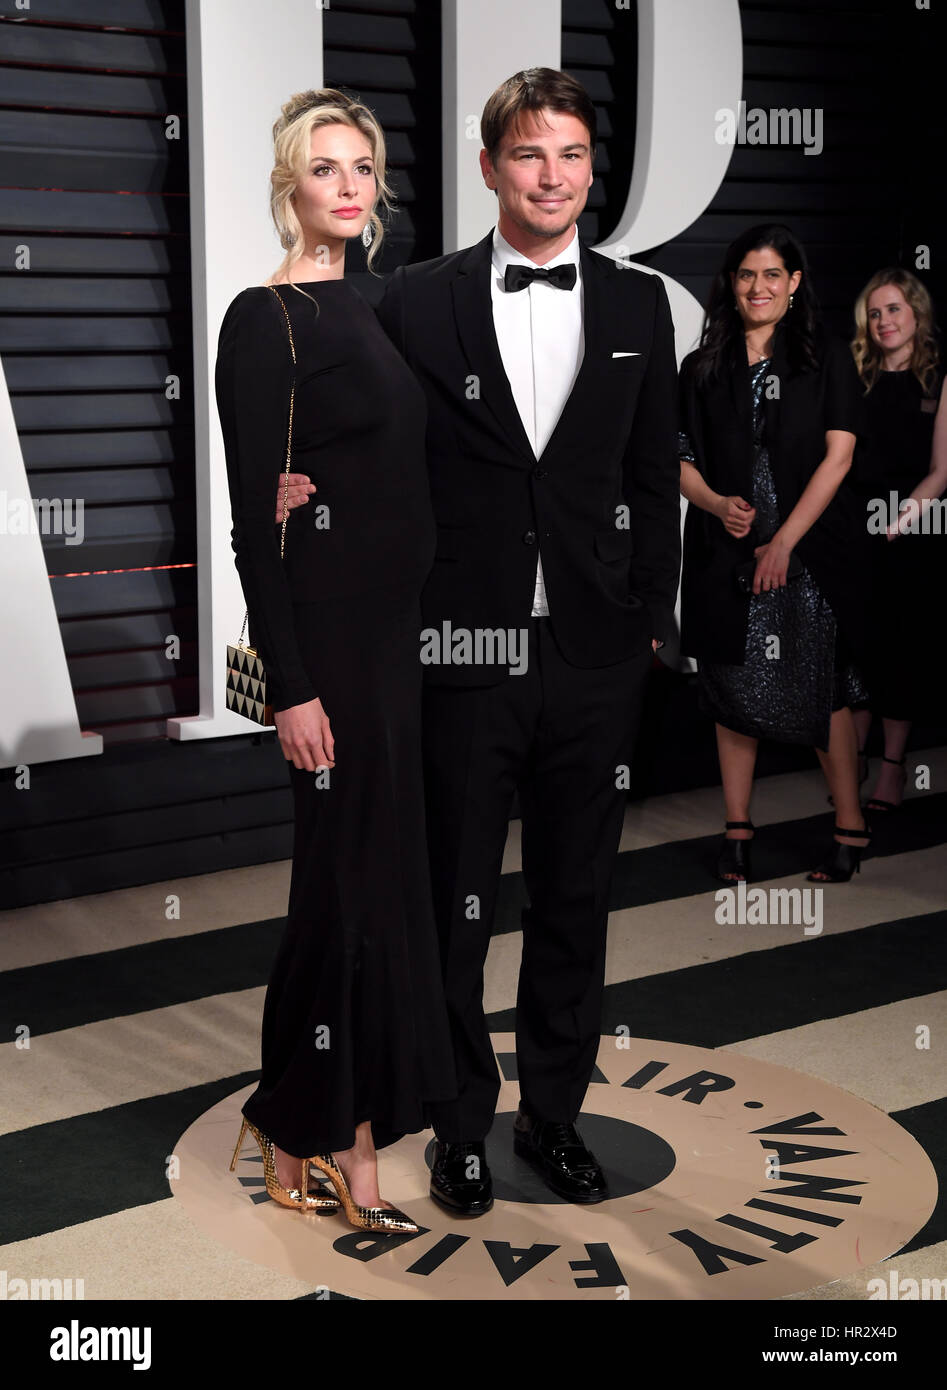 Josh Hartnett and Tamsin Egerton arriving at the Vanity Fair Oscar Party in Beverly Hills, Los Angeles, USA. Stock Photo